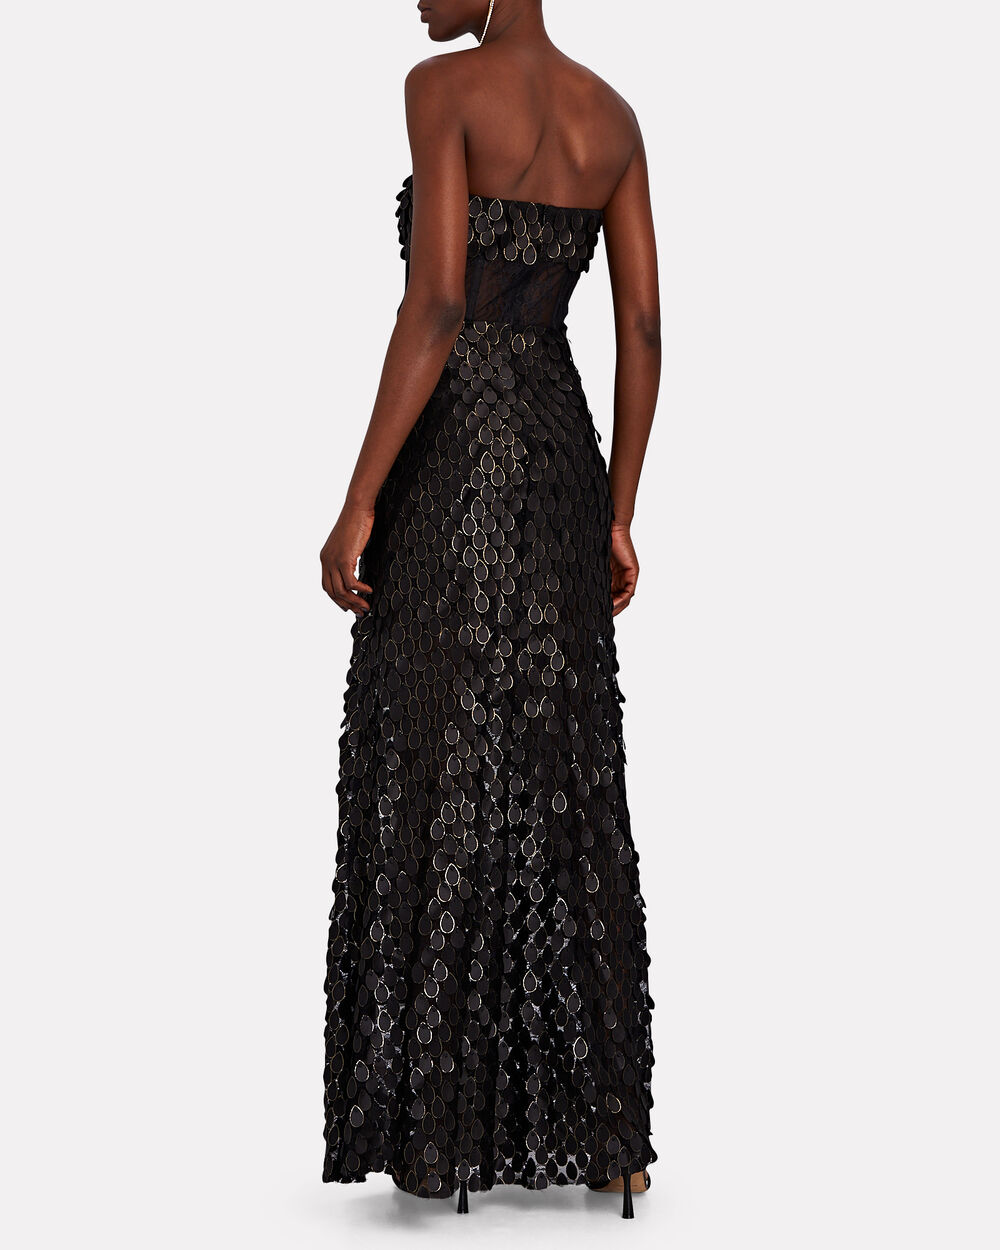 MANNING CARTELL Supreme Extreme Gown In Black | INTERMIX®